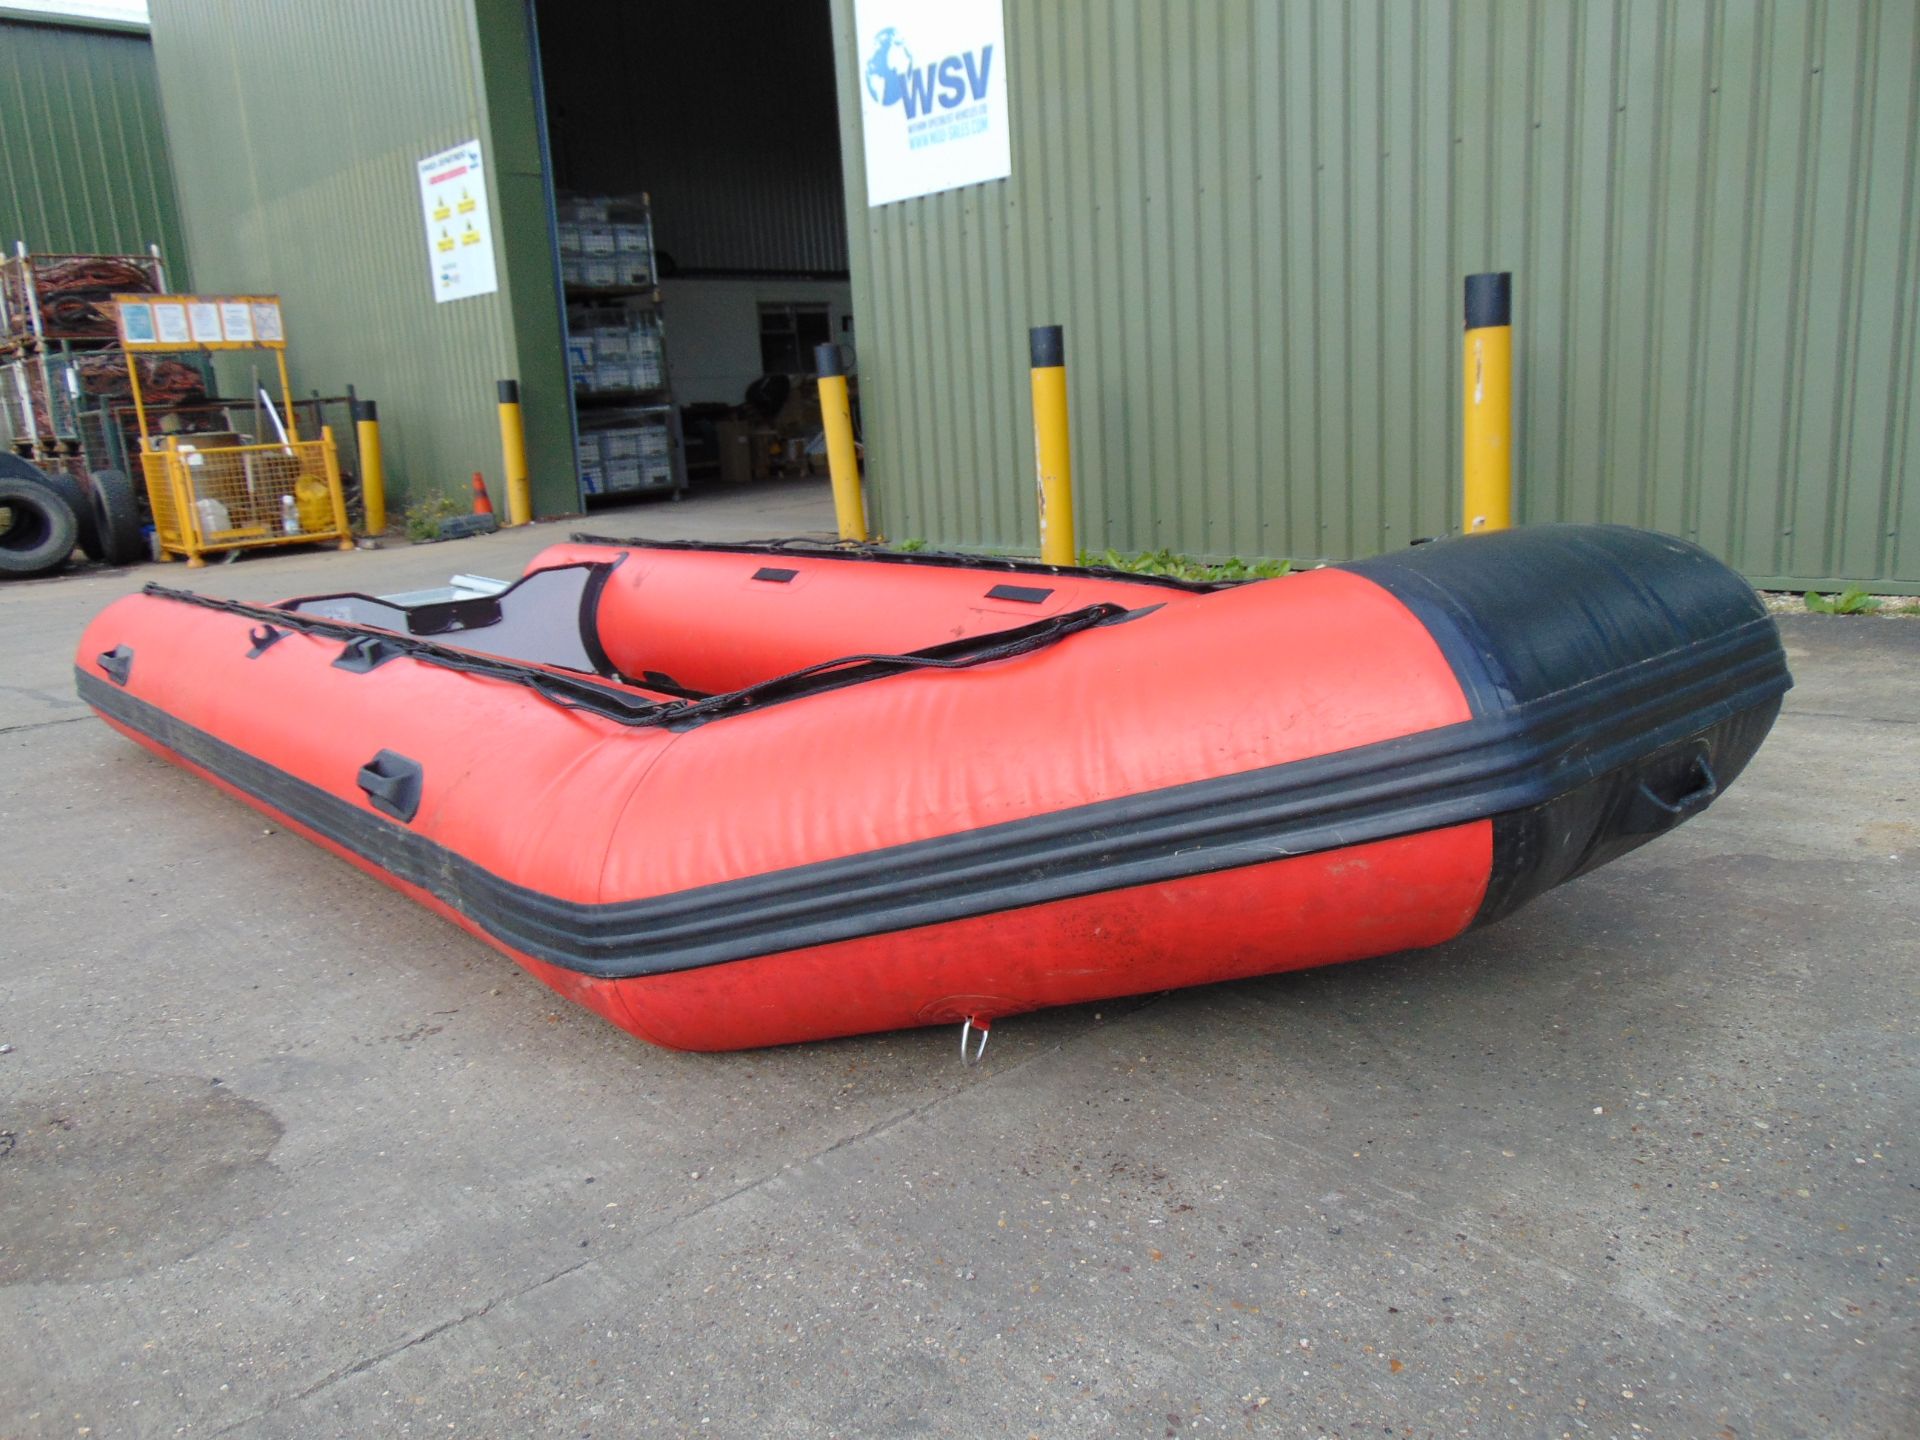 Sinoboat Inflatable Flood Rescue Boat - Image 2 of 14